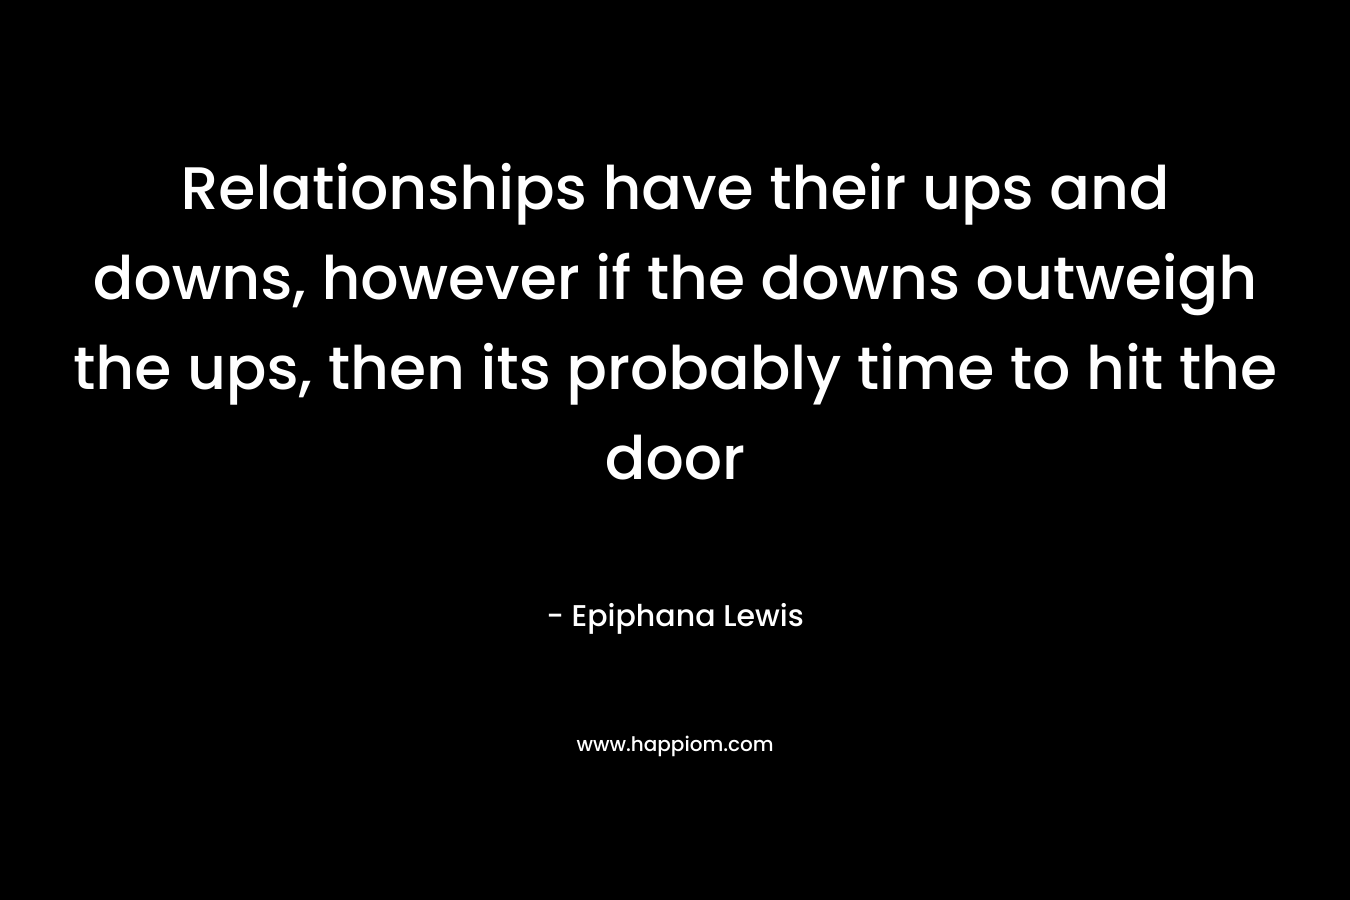 Relationships have their ups and downs, however if the downs outweigh the ups, then its probably time to hit the door